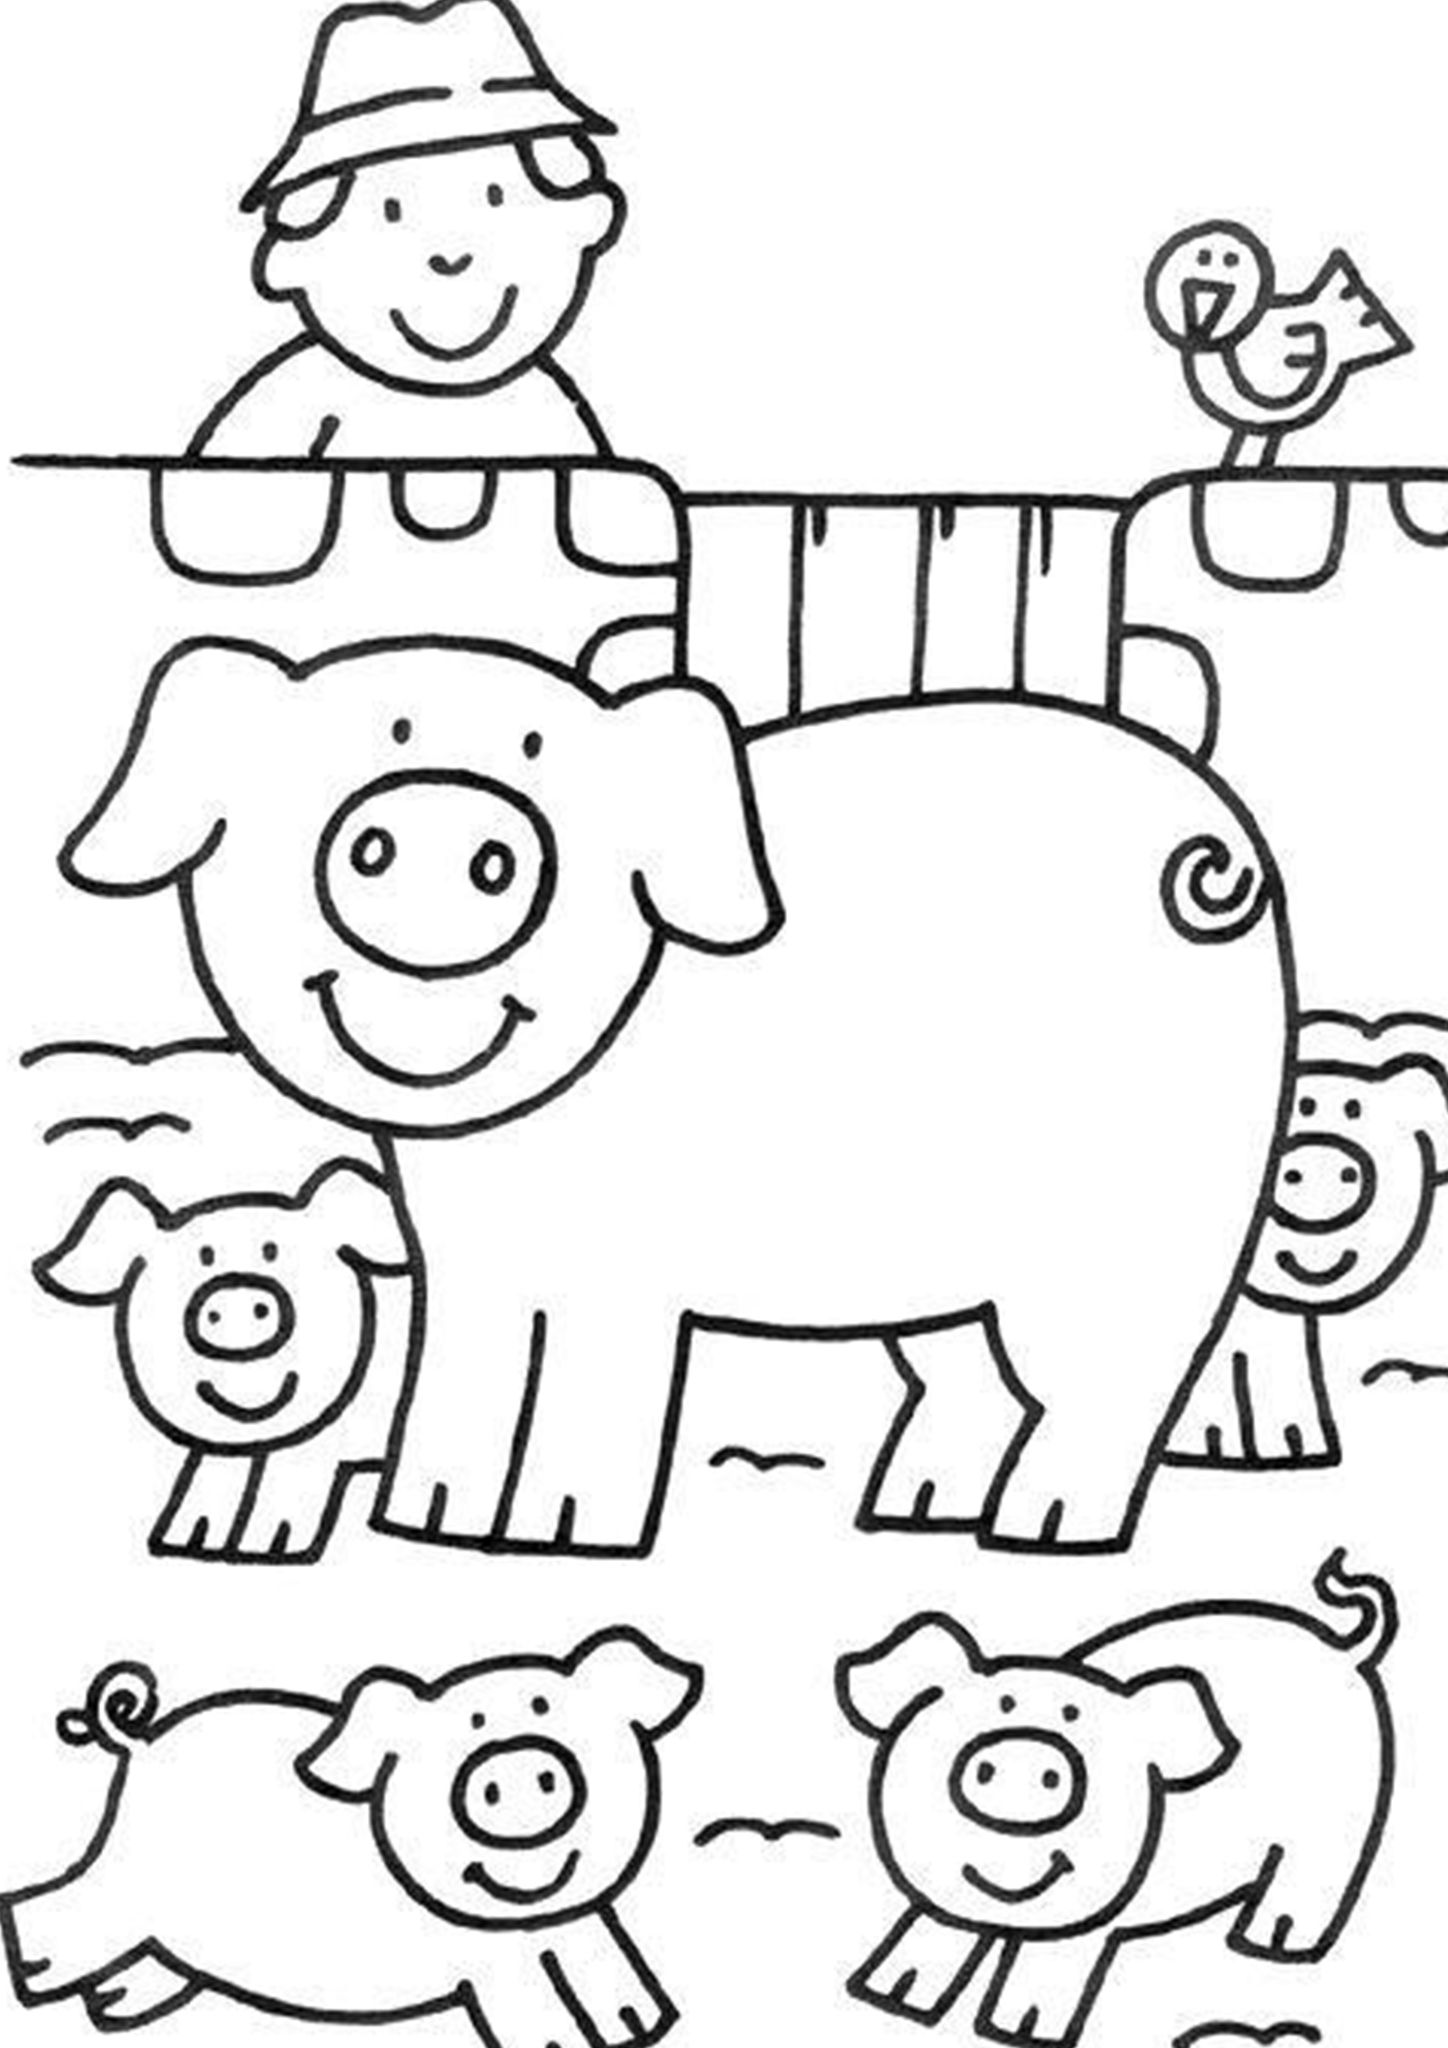 Free & Easy To Print Farm Coloring Pages | Farm animal coloring pages, Farm  coloring pages, Animal coloring pages